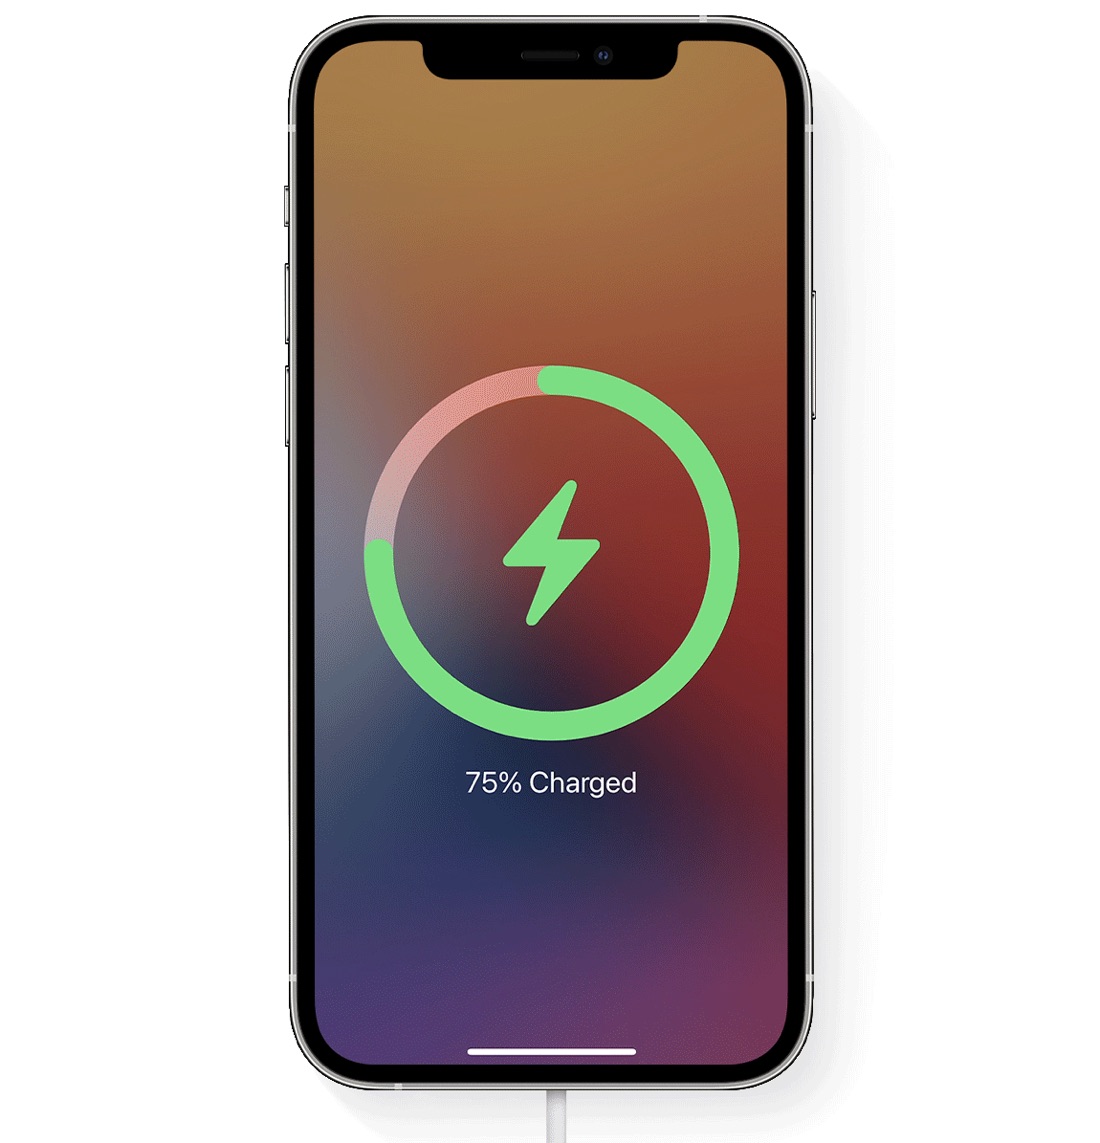 iOS 16 to Gain ‘Clean Energy Charging’ Option Later This Year